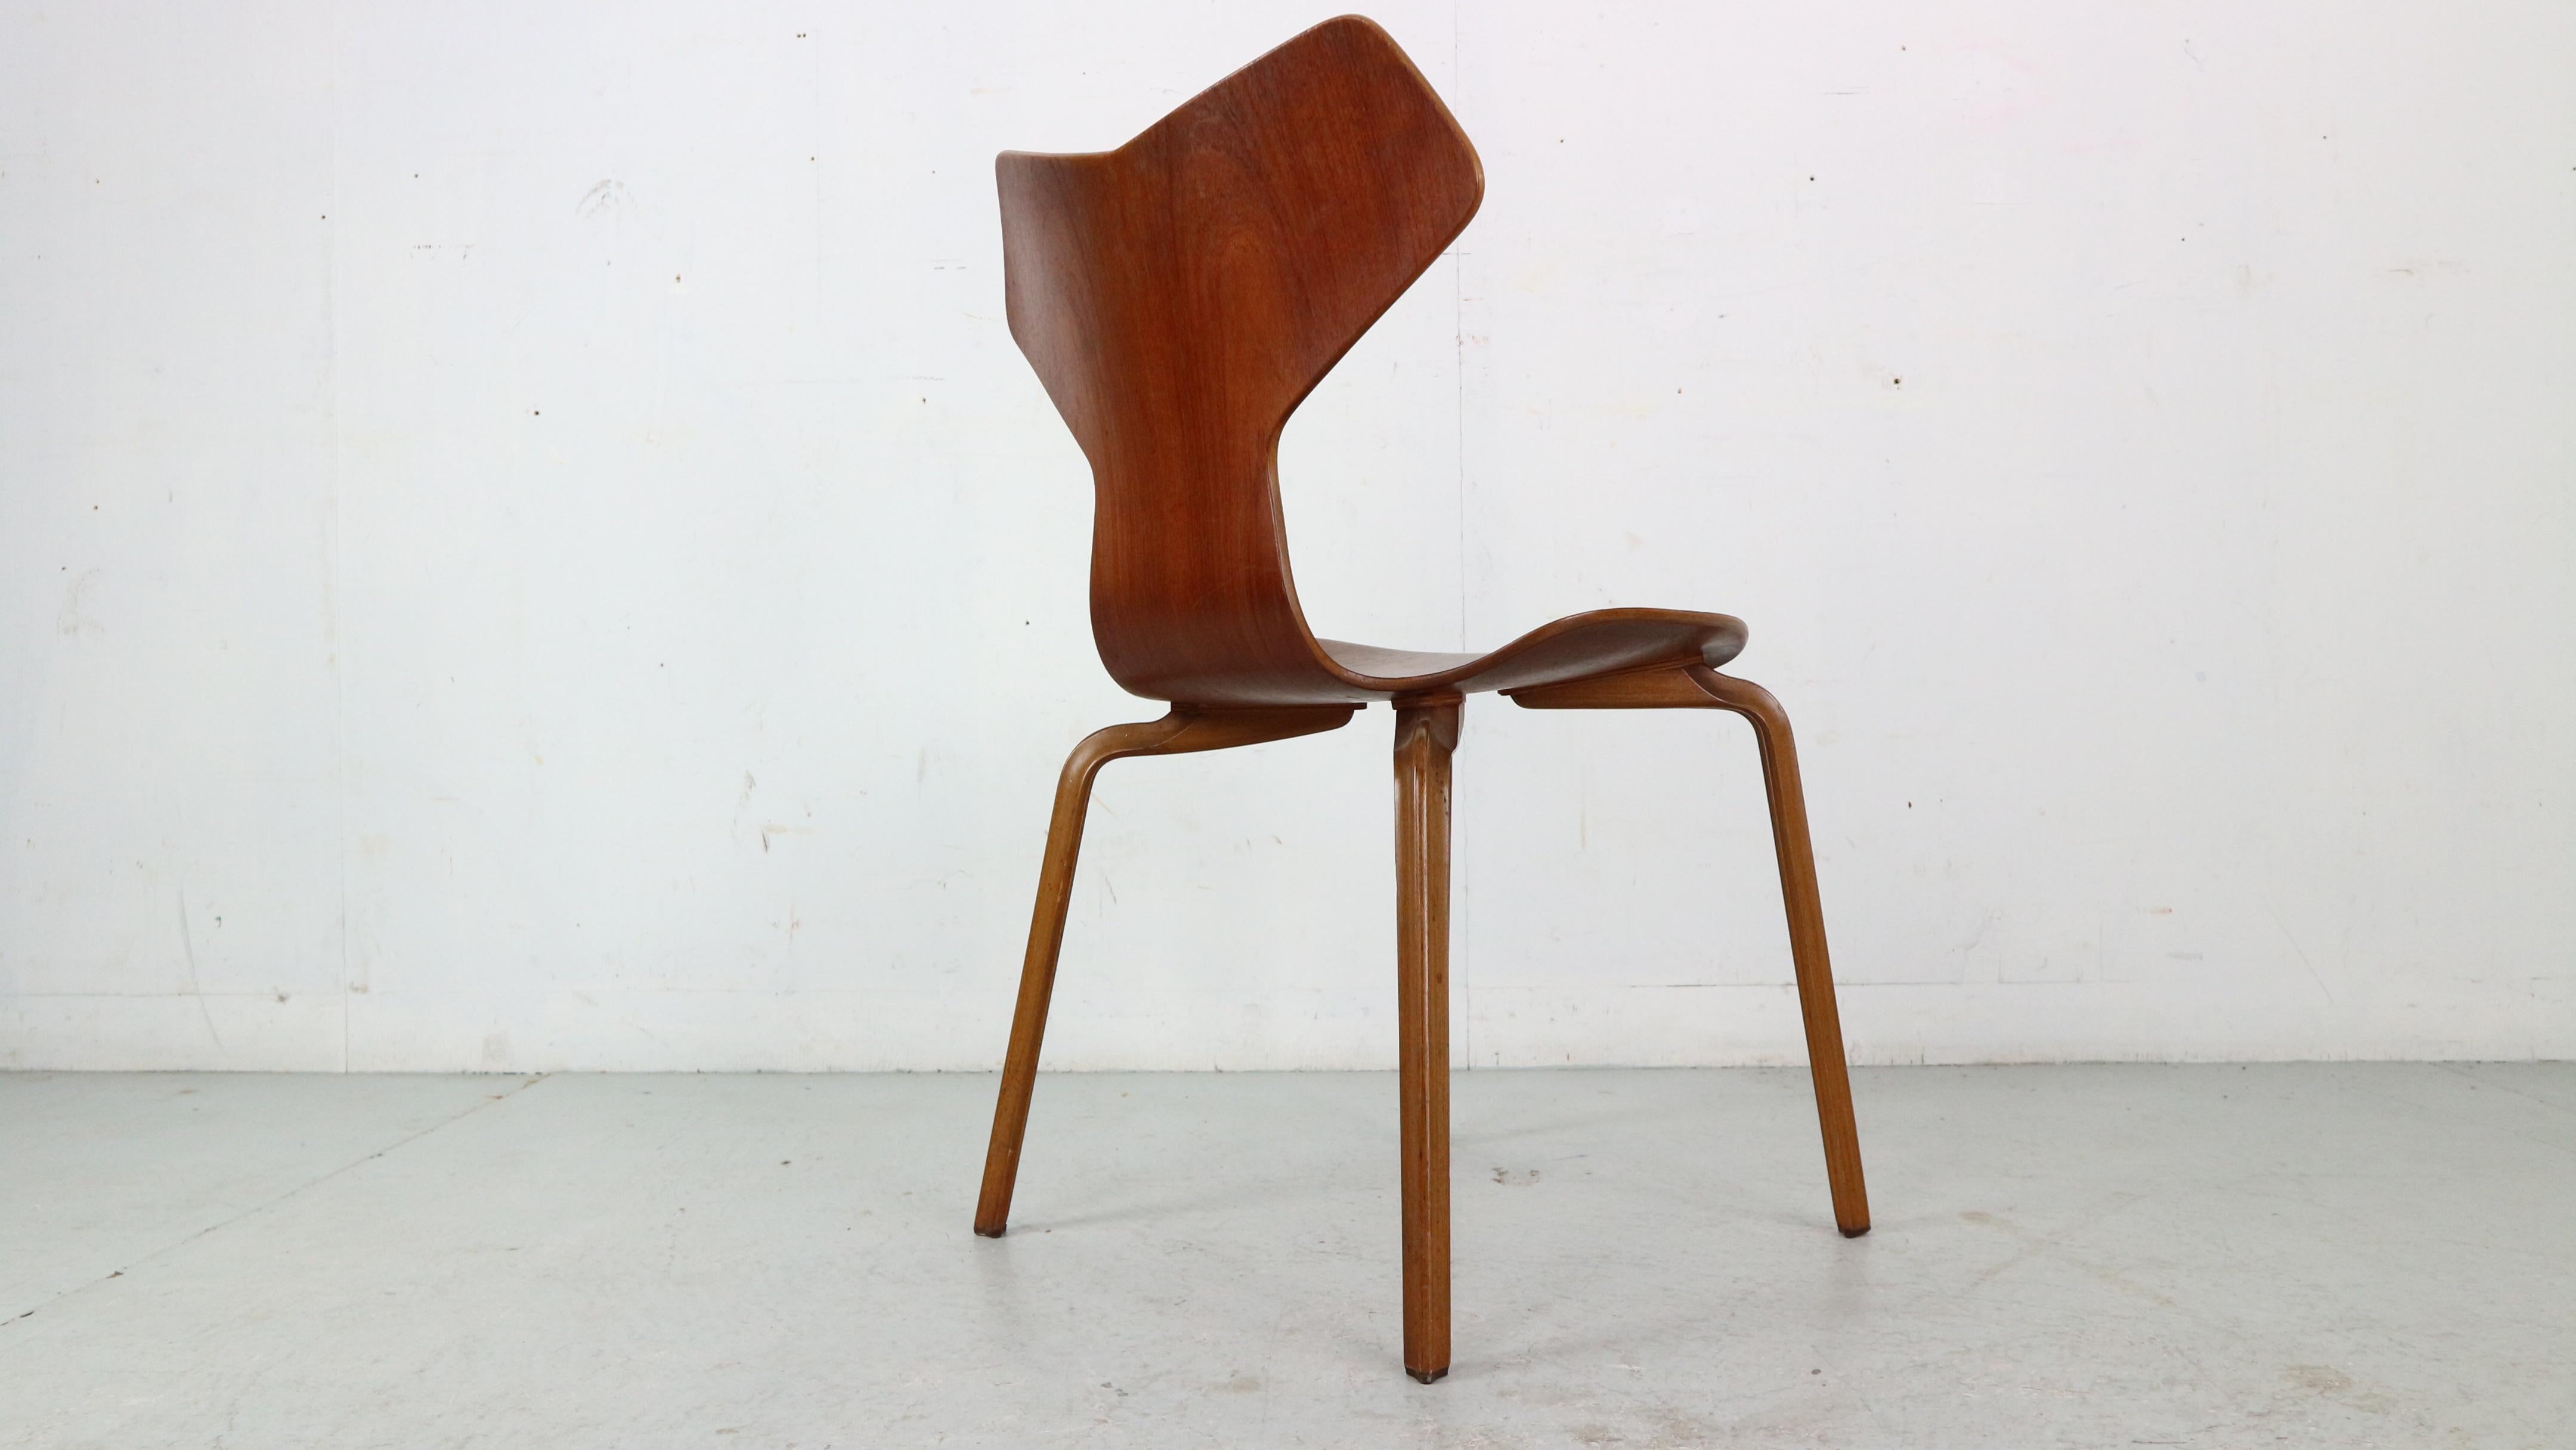 The Grand Prix chair from 1957 is the only shell chair by Arne Jacobsen that was not designed with steel legs.
The chair, which is made entirely in wood, represents Arne Jacobsen’s attempt at creating a lightweight, modern chair that appealed to an